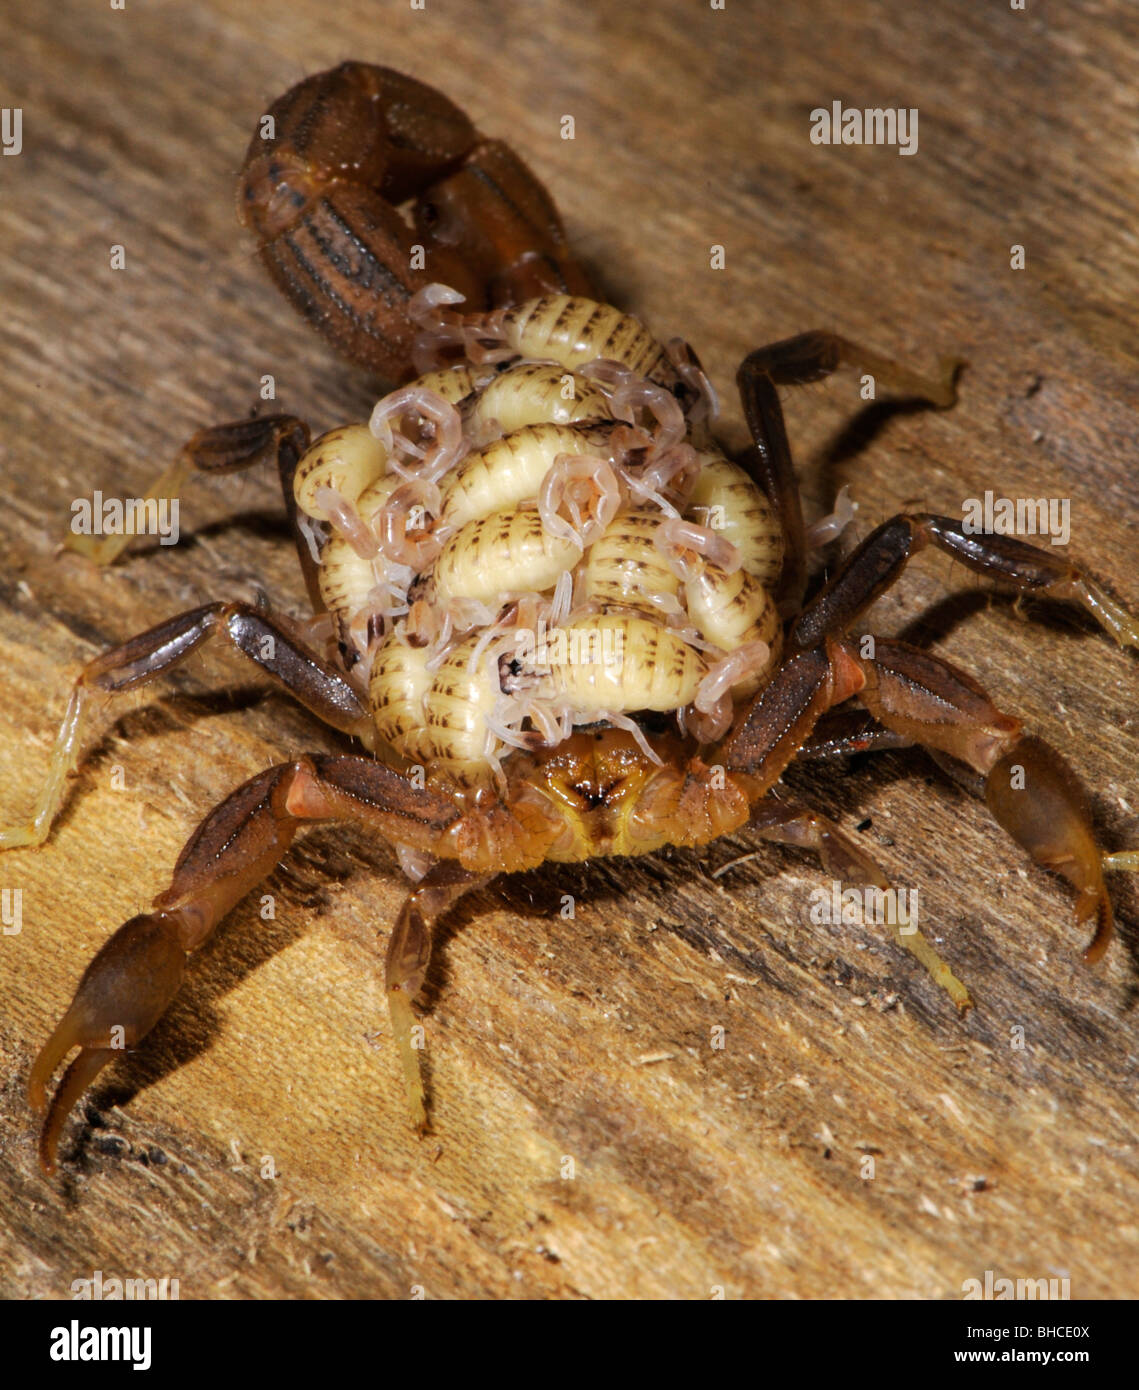 Hottentota scorpion, carrying its young, photographed in Tanzania, Africa Stock Photo